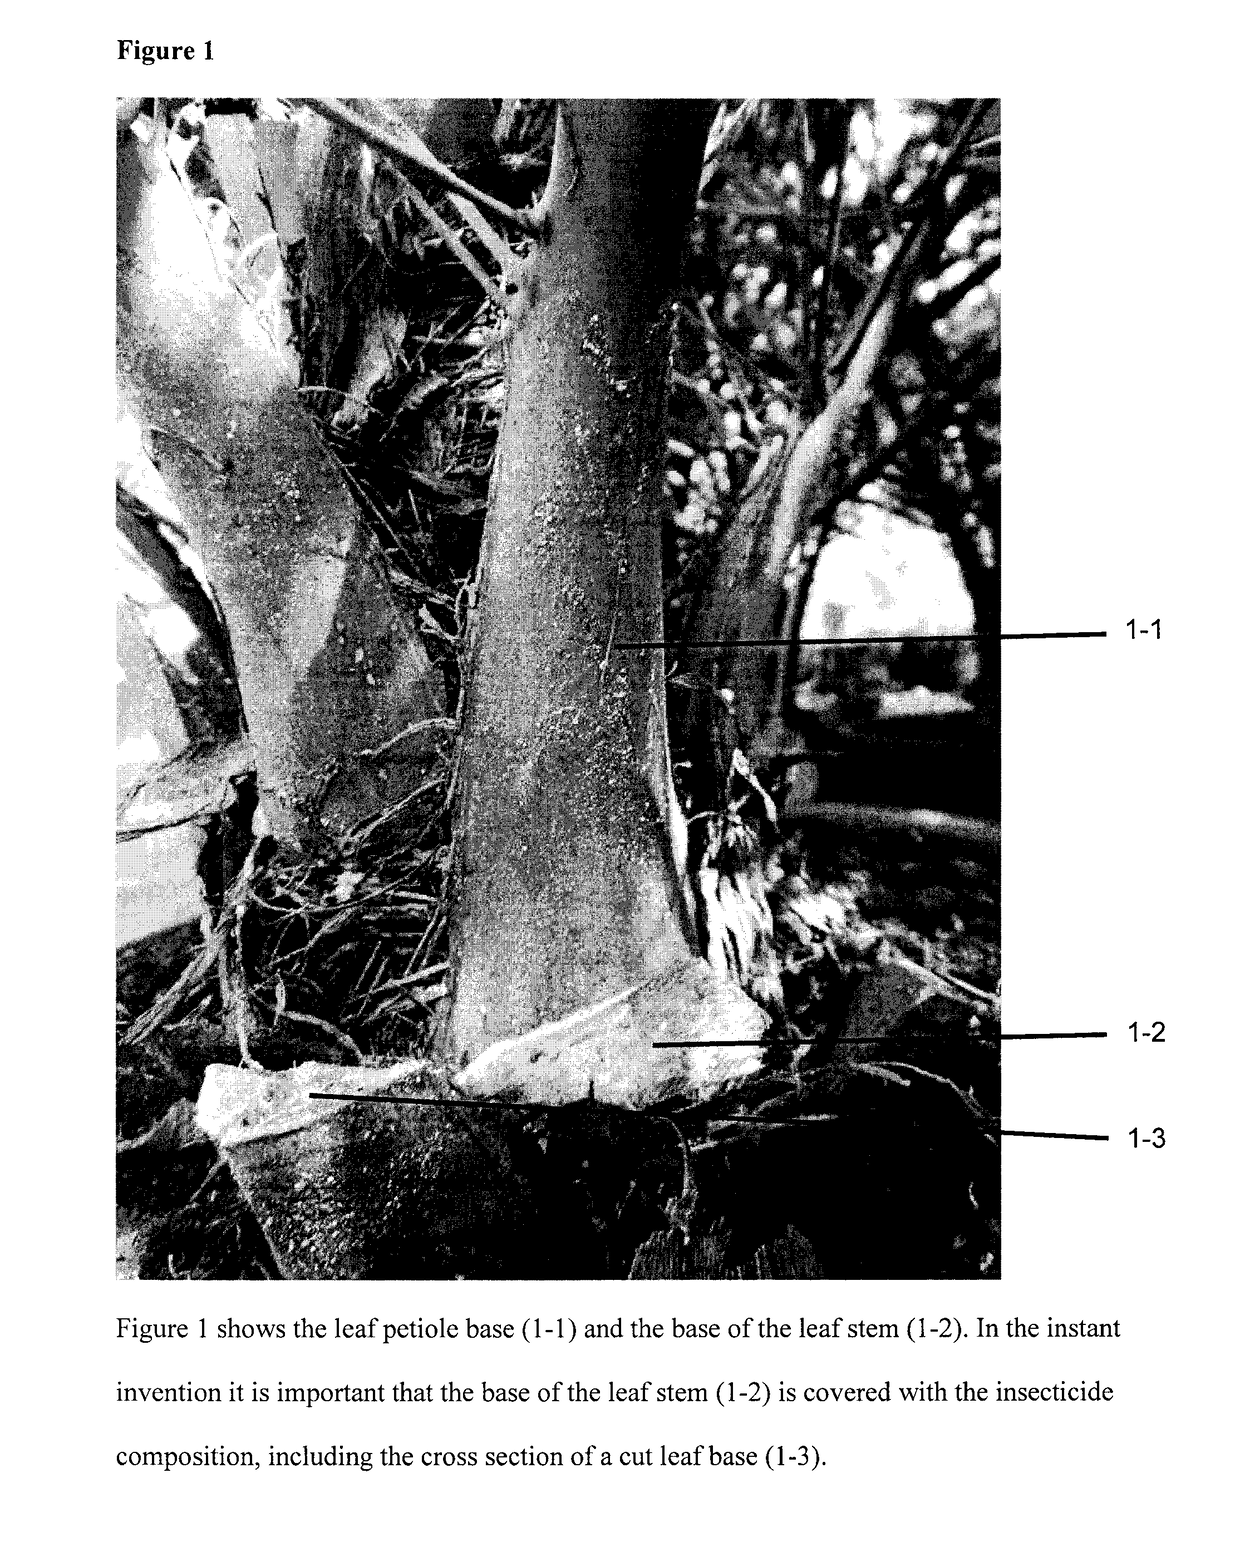 Insecticide-containing coating composition and method for protecting palm trees from pests